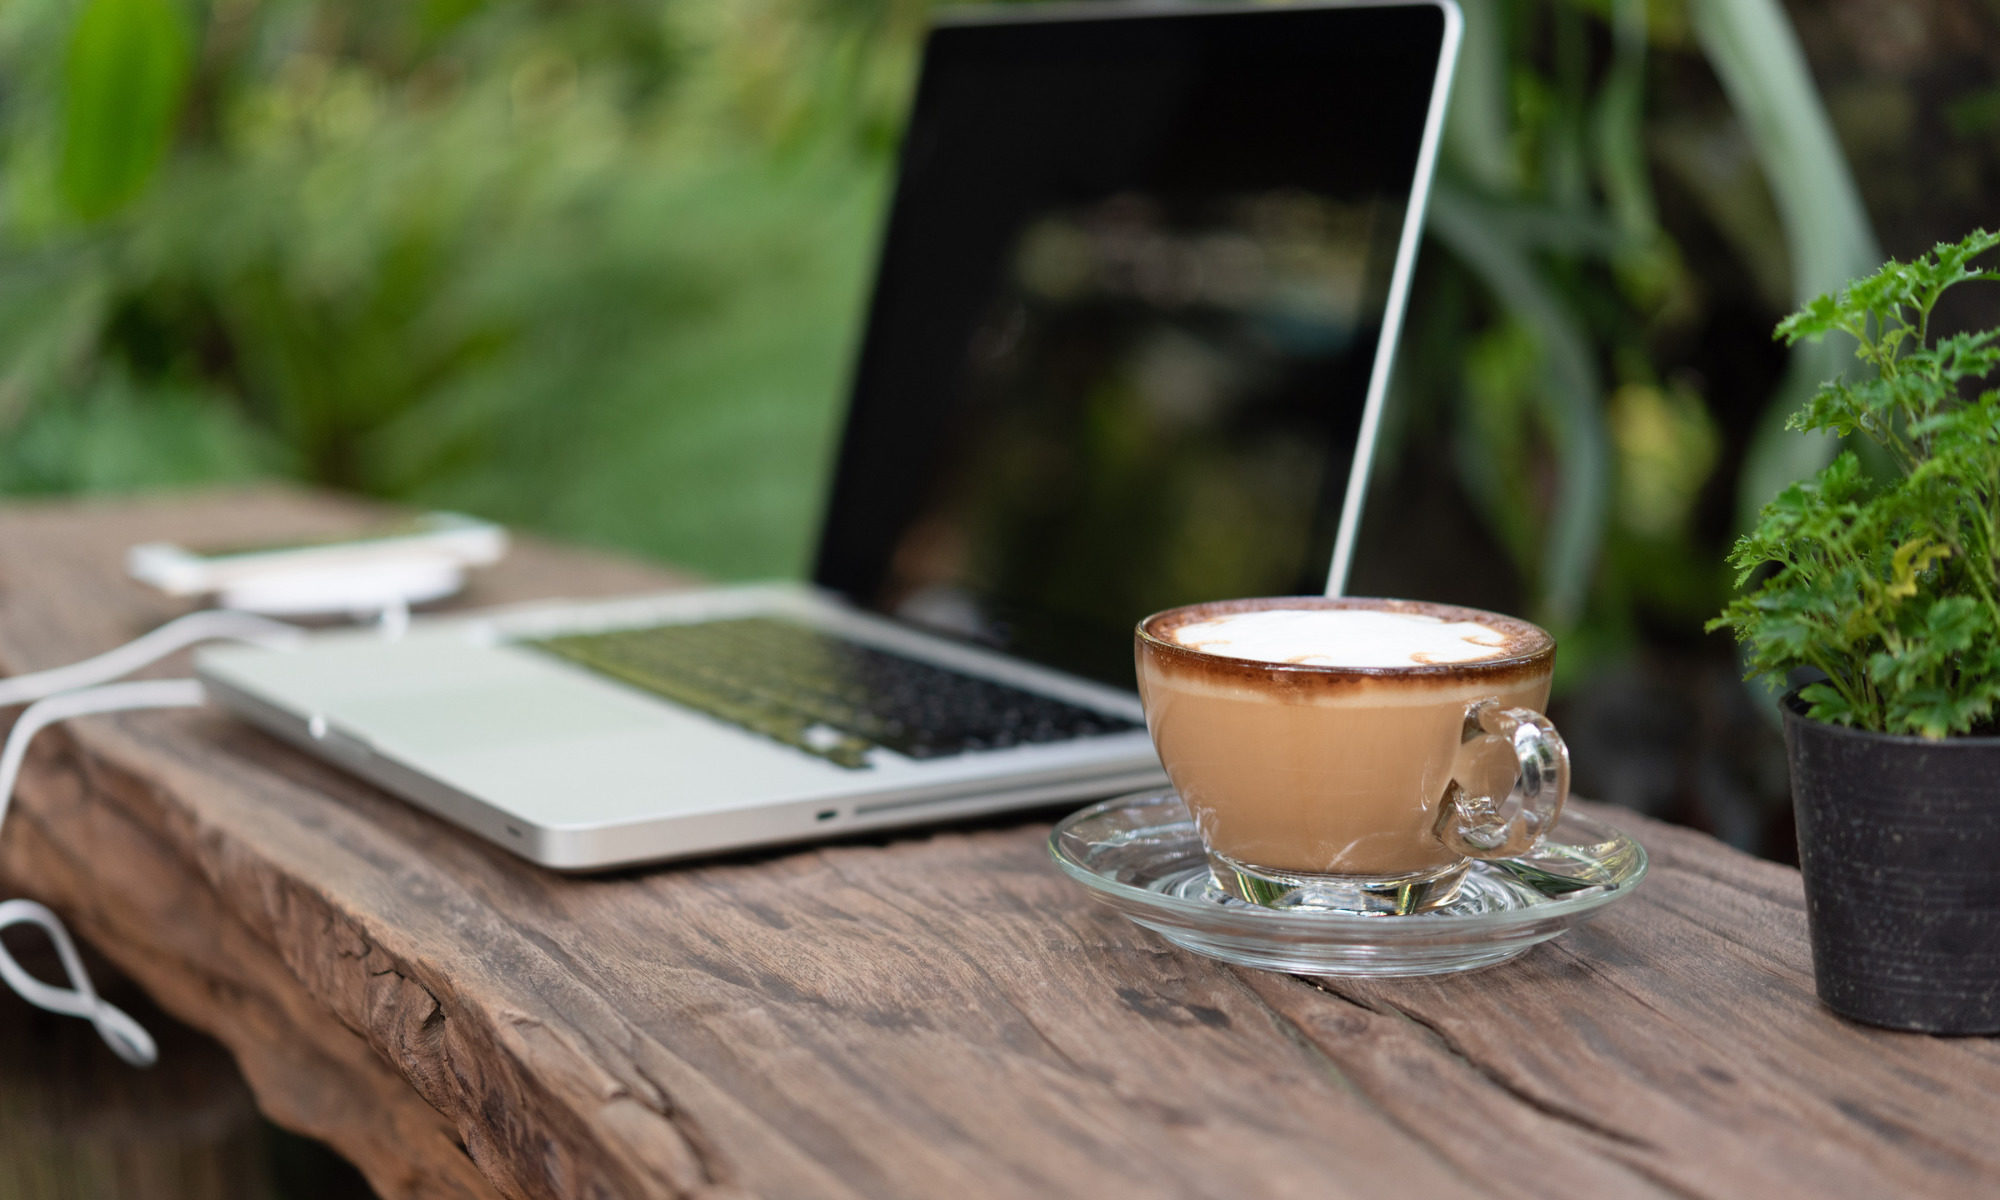 Image of plant, coffee, laptop on a raw wooden surface outside